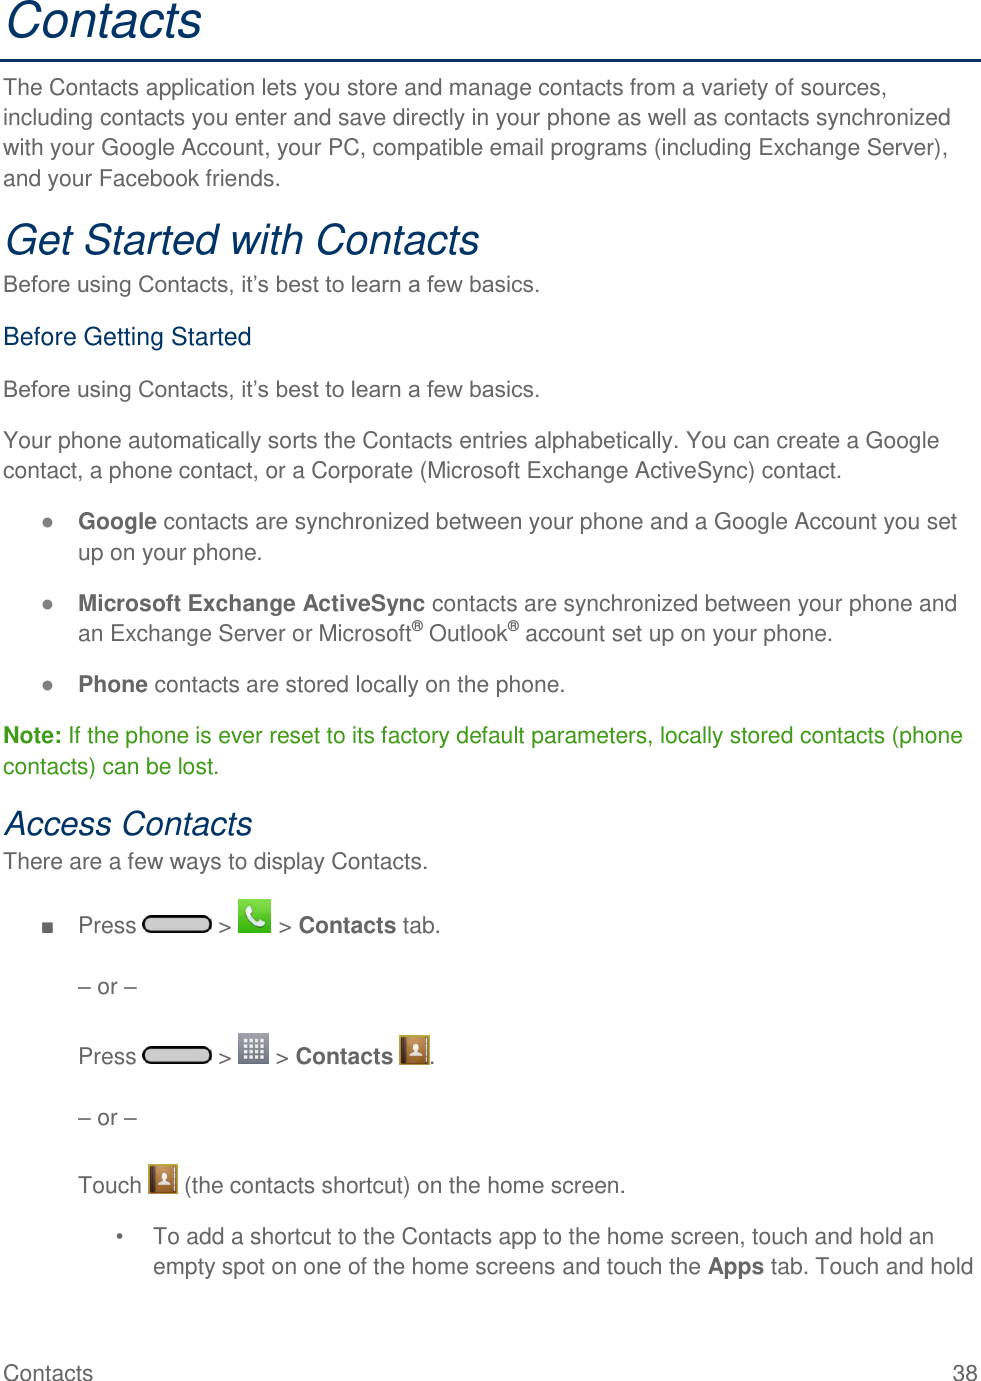 Contacts  38 Contacts The Contacts application lets you store and manage contacts from a variety of sources, including contacts you enter and save directly in your phone as well as contacts synchronized with your Google Account, your PC, compatible email programs (including Exchange Server), and your Facebook friends. Get Started with Contacts Before using Contacts, it‘s best to learn a few basics. Before Getting Started Before using Contacts, it‘s best to learn a few basics. Your phone automatically sorts the Contacts entries alphabetically. You can create a Google contact, a phone contact, or a Corporate (Microsoft Exchange ActiveSync) contact. ● Google contacts are synchronized between your phone and a Google Account you set up on your phone. ● Microsoft Exchange ActiveSync contacts are synchronized between your phone and an Exchange Server or Microsoft® Outlook® account set up on your phone. ● Phone contacts are stored locally on the phone. Note: If the phone is ever reset to its factory default parameters, locally stored contacts (phone contacts) can be lost. Access Contacts There are a few ways to display Contacts. ■  Press   &gt;   &gt; Contacts tab.  – or –   Press   &gt;   &gt; Contacts  .  – or –  Touch   (the contacts shortcut) on the home screen. •  To add a shortcut to the Contacts app to the home screen, touch and hold an empty spot on one of the home screens and touch the Apps tab. Touch and hold 